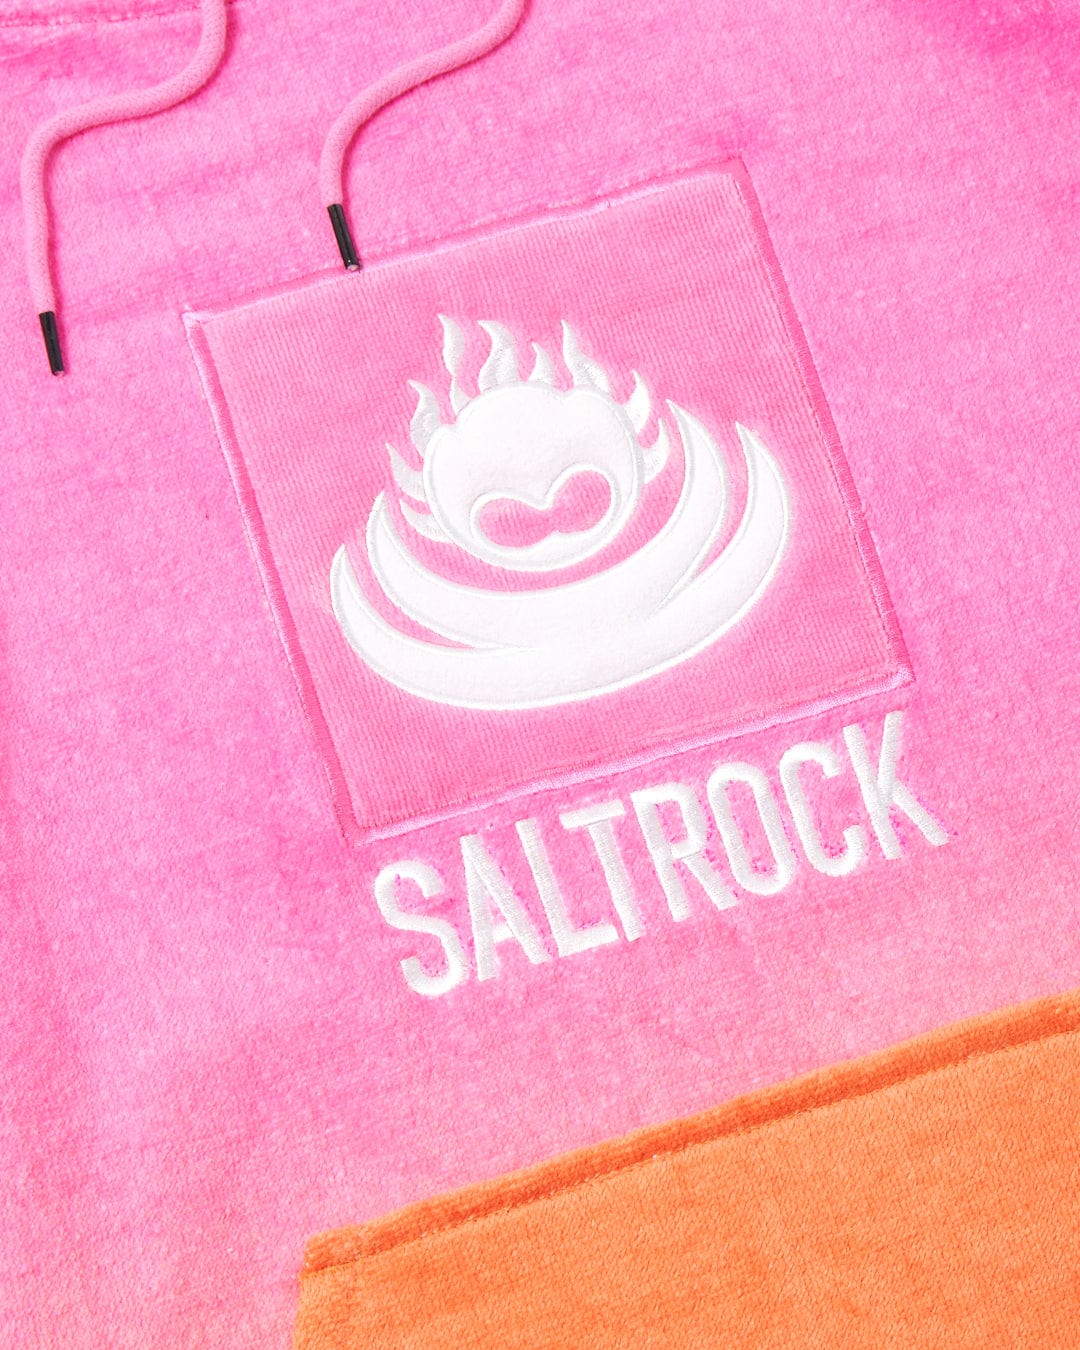 Close-up of a Saltrock pink saltrock hoodie with an embroidered logo featuring a flaming heart design above the brand name, made from 100% cotton.